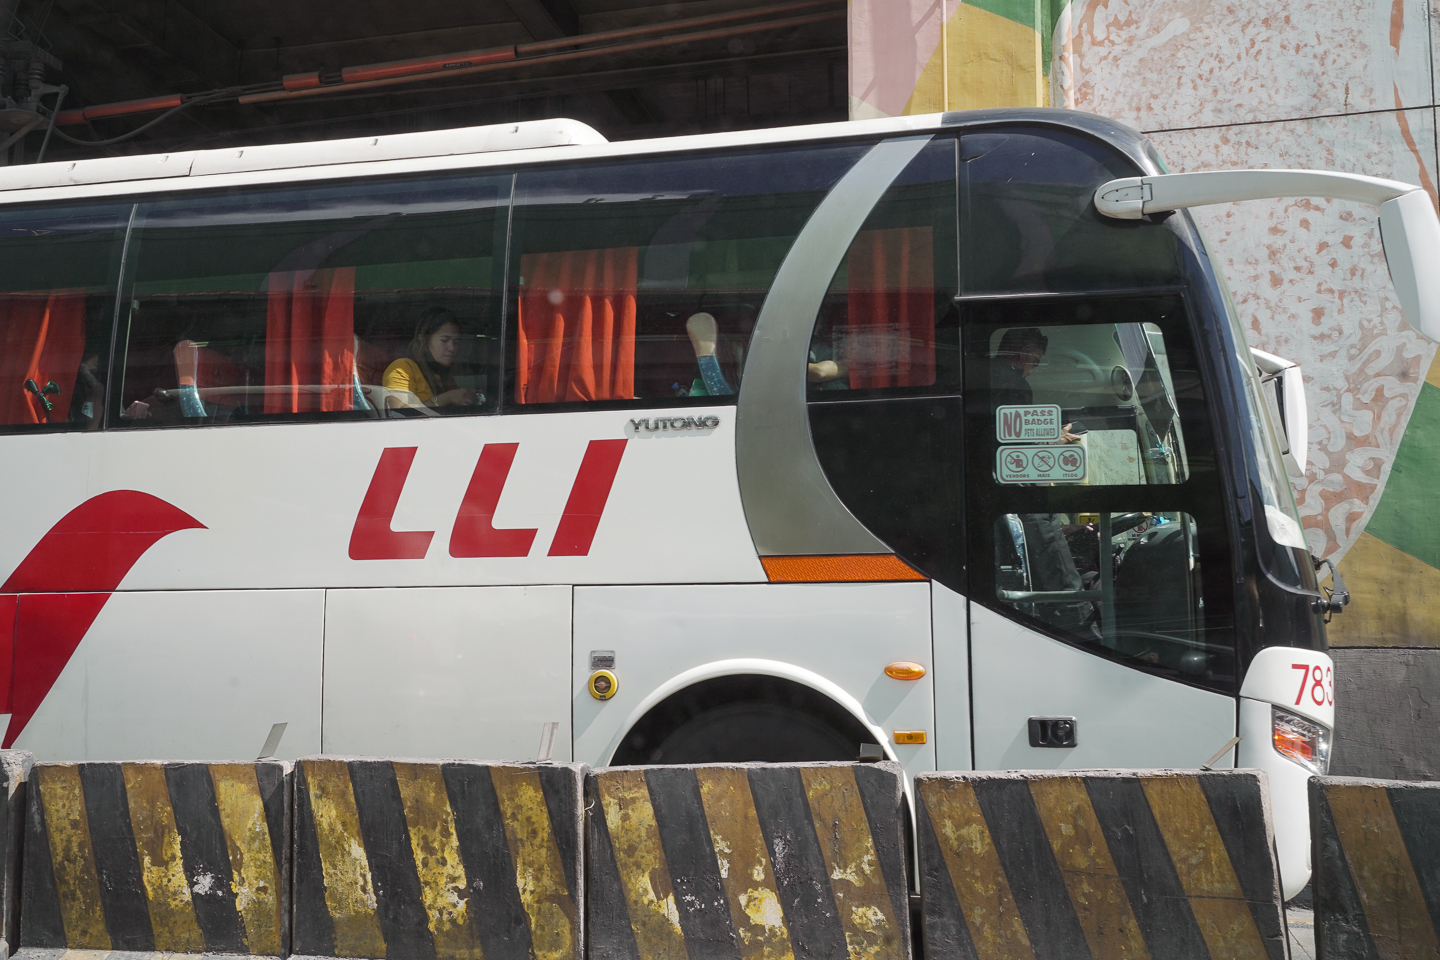 DOTr wants to put Carousel Bus Terminal in Caloocan City; 3 possible locations have been earmarked